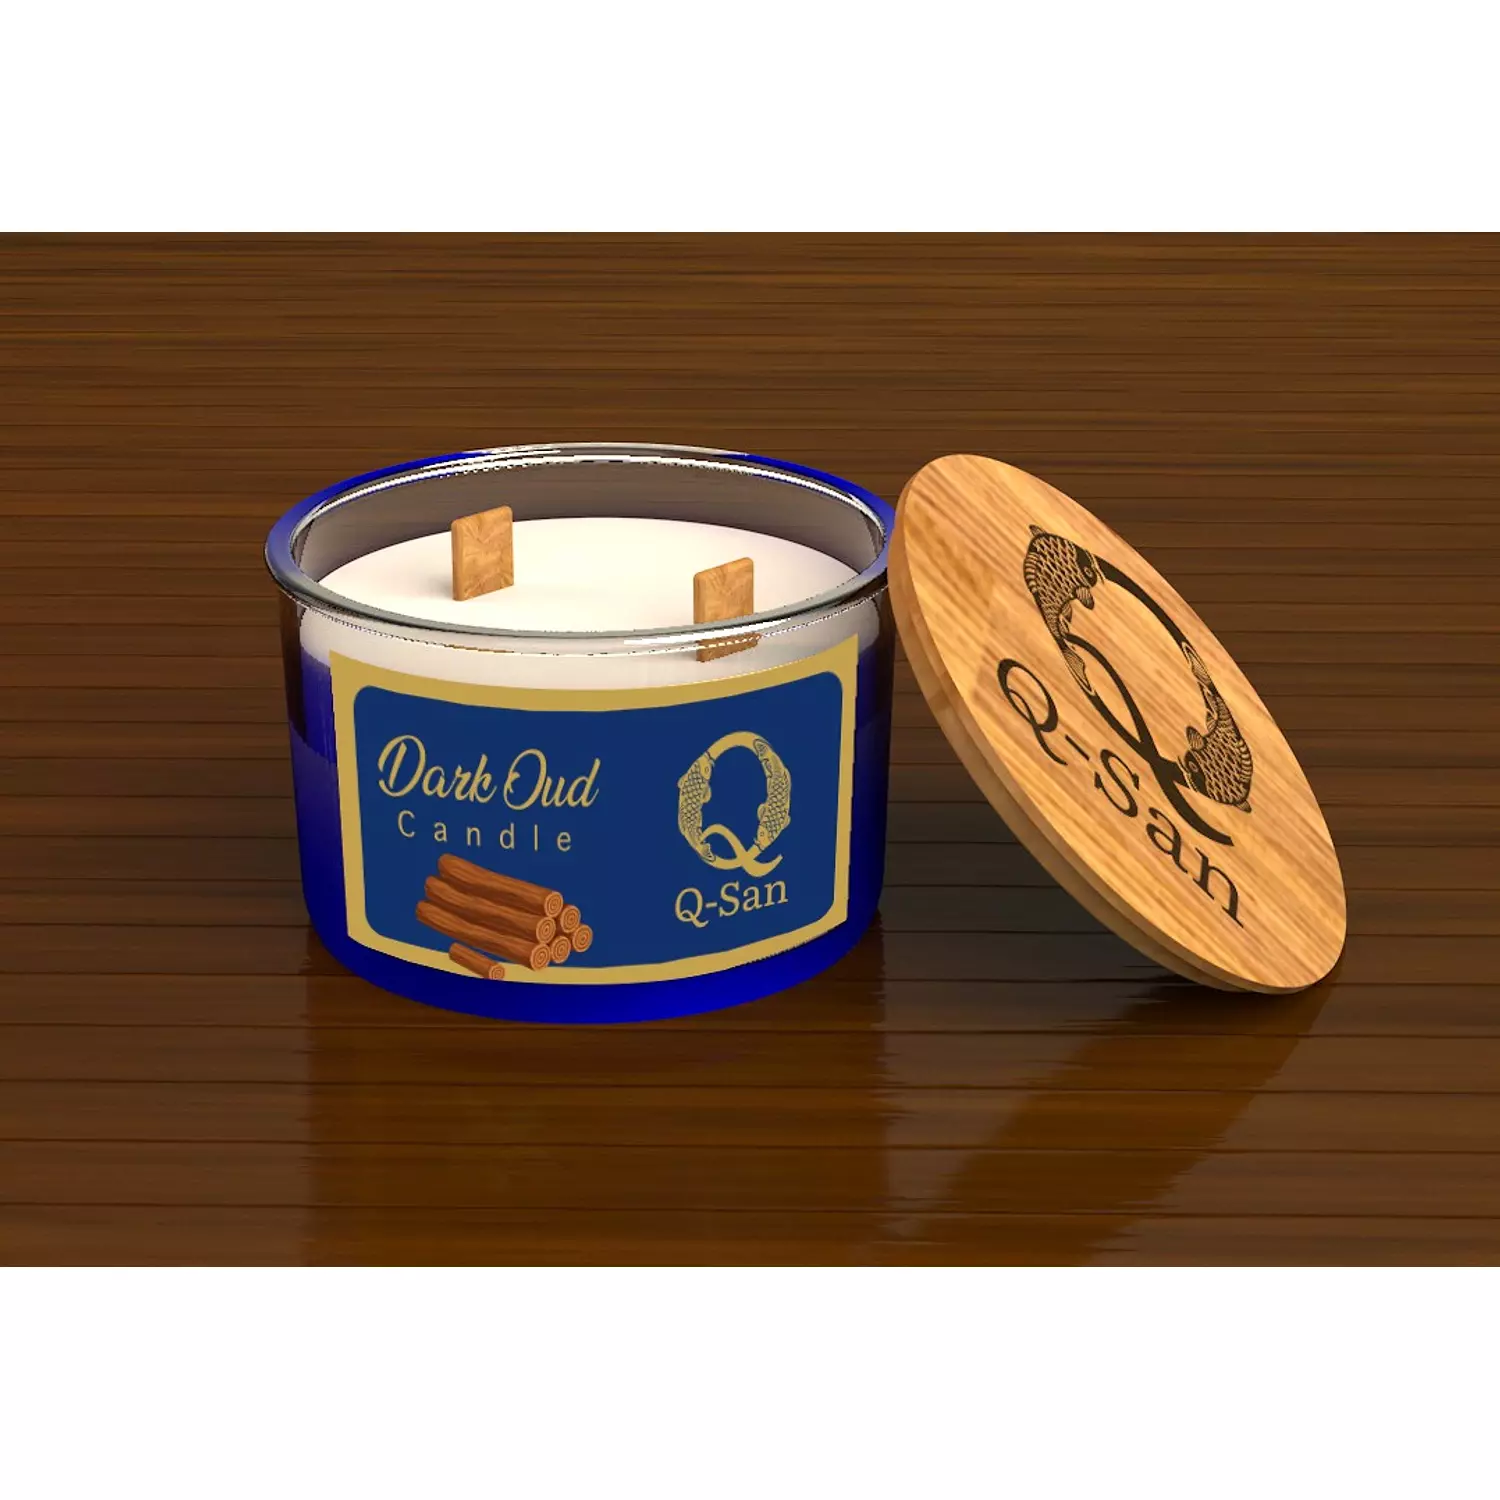 Dark Oud Candle hover image